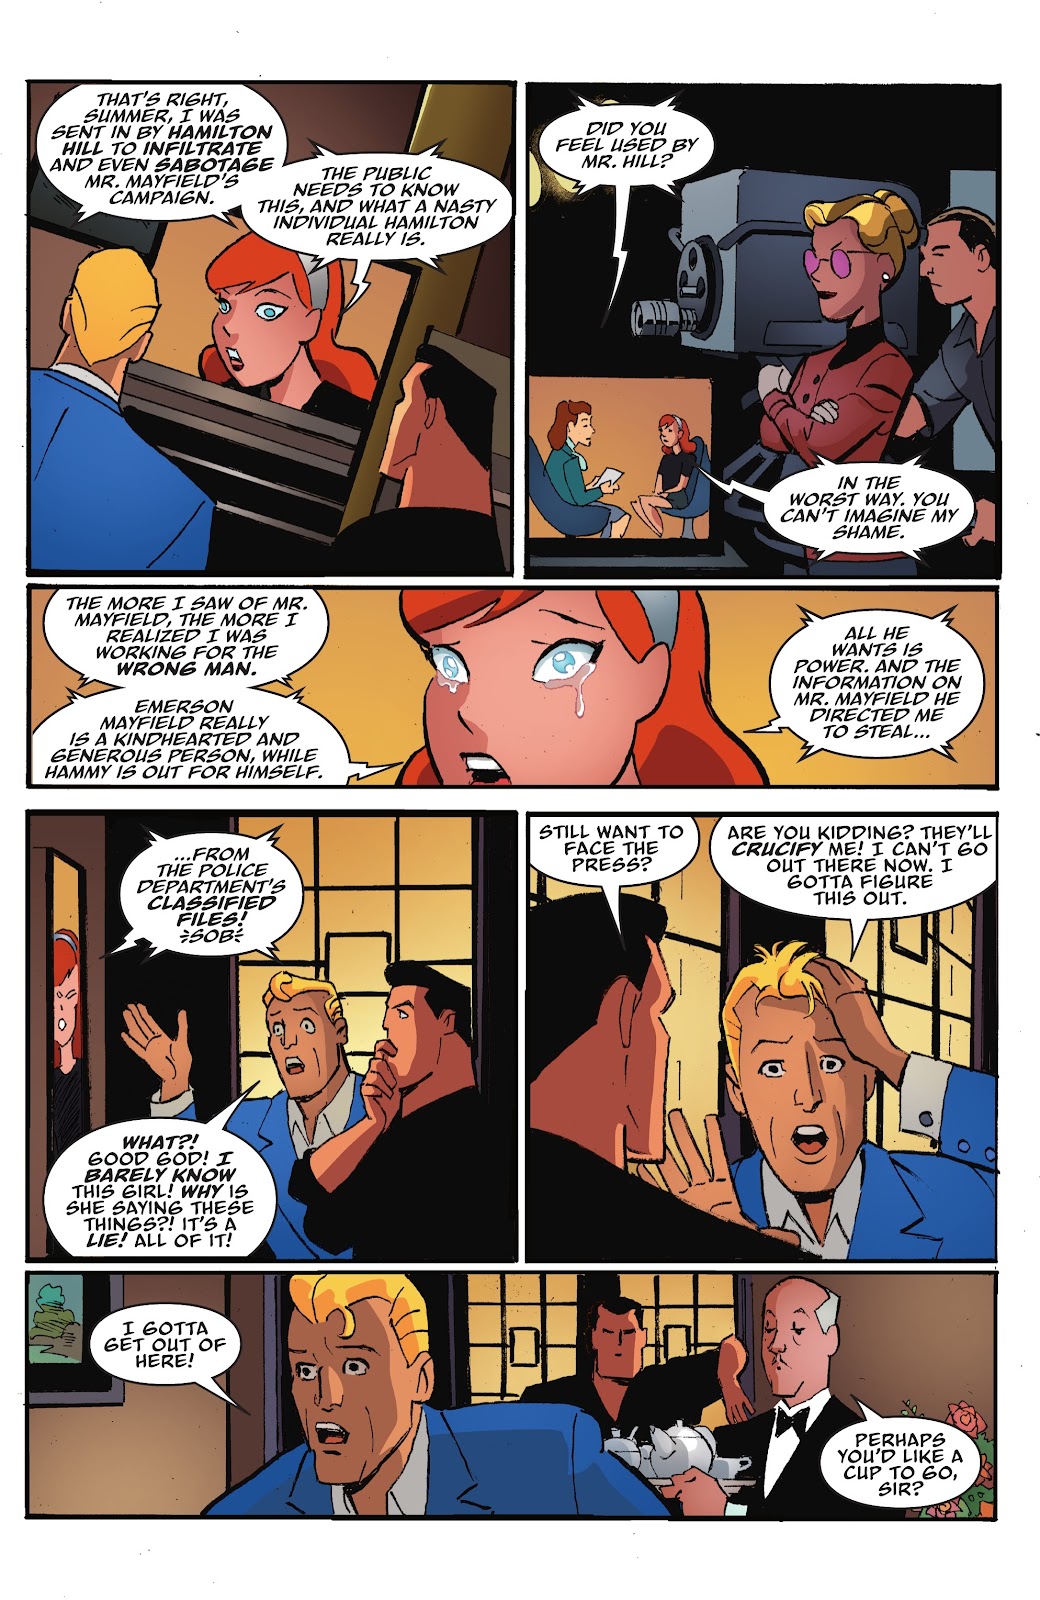 Batman: The Adventures Continue: Season Two issue 7 - Page 11